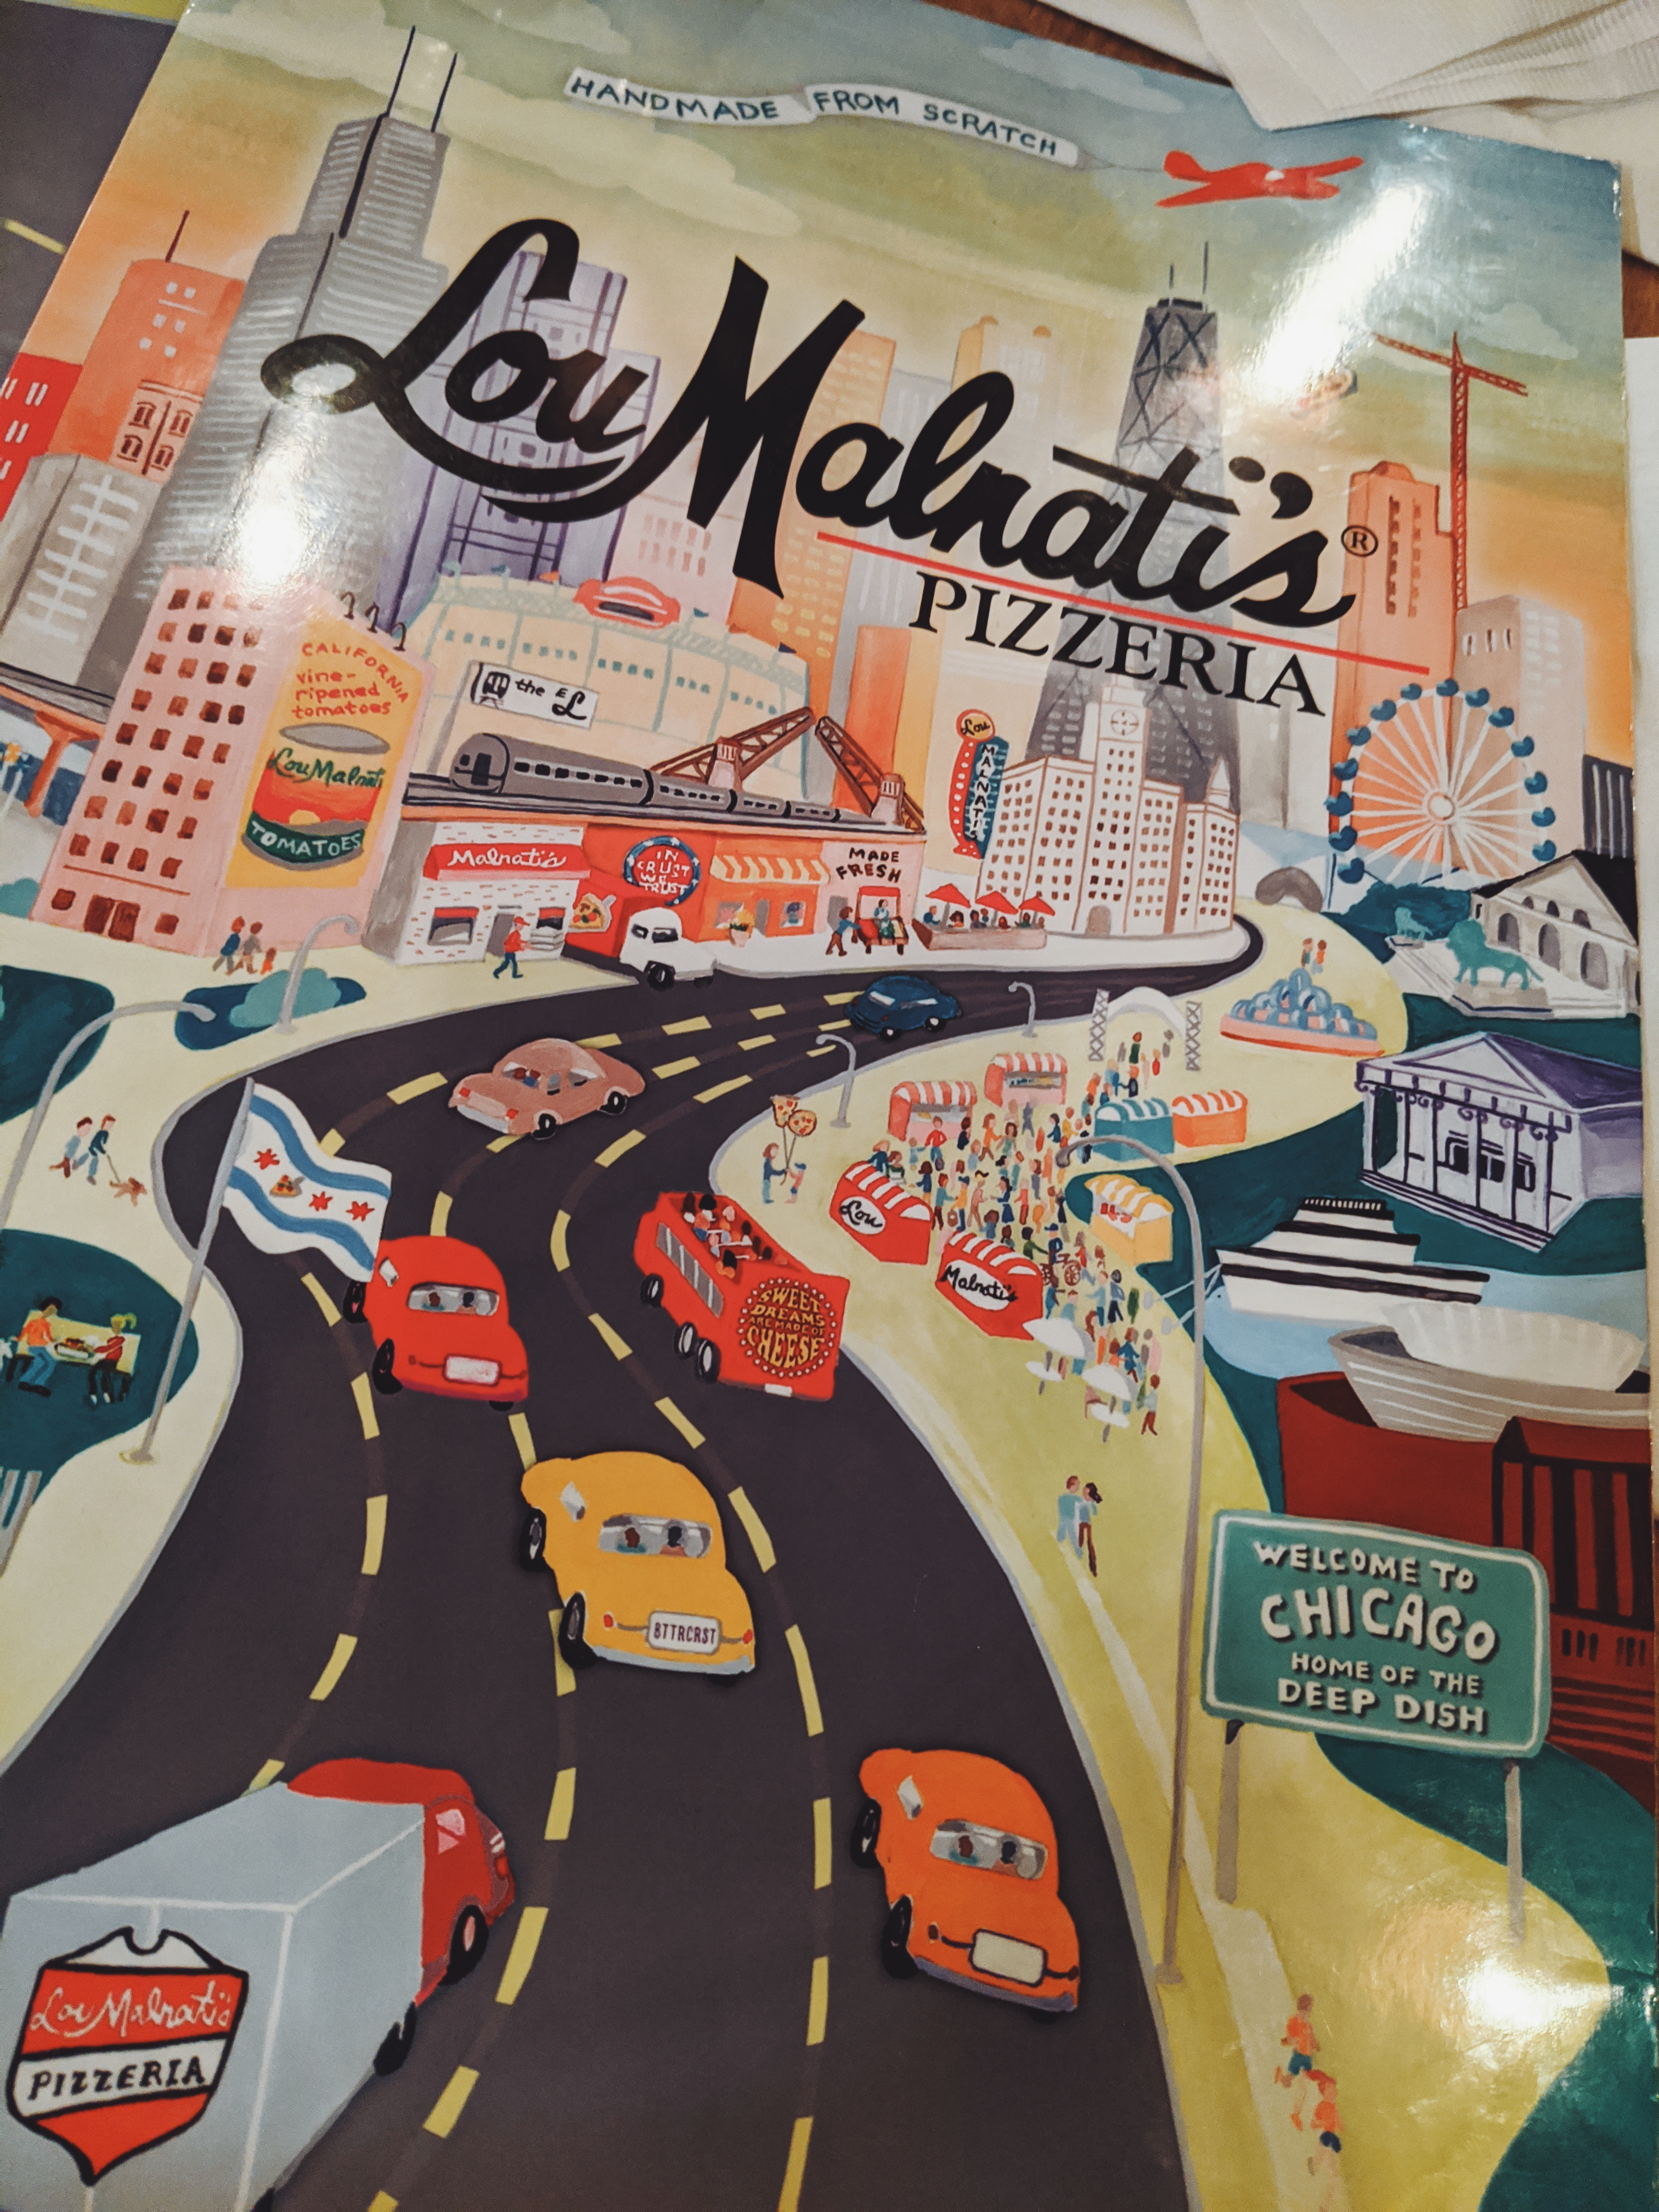 Chicago Deep Dish Pizza - Lou Malnati's Review - Wanting the best deep dish pizza in Chicago? Check out Lou Malnati's Michigan Ave in Chicago! #chicago #pizza #familytravel 